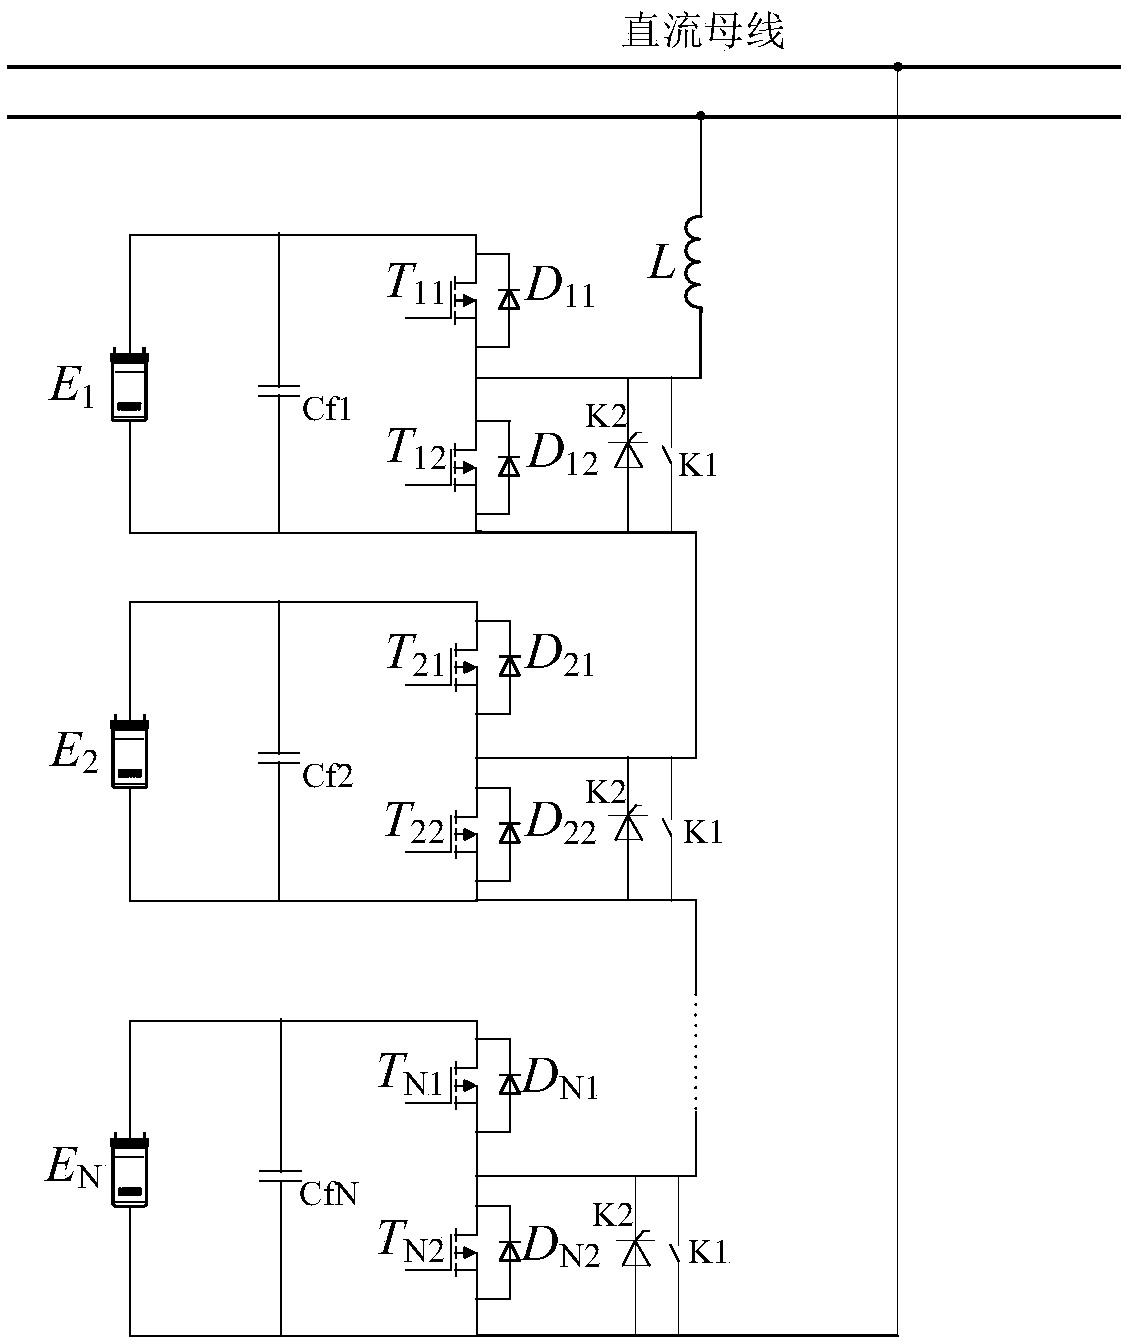 Chain-type battery energy storage converter and control method suitable for medium-voltage direct current distribution network